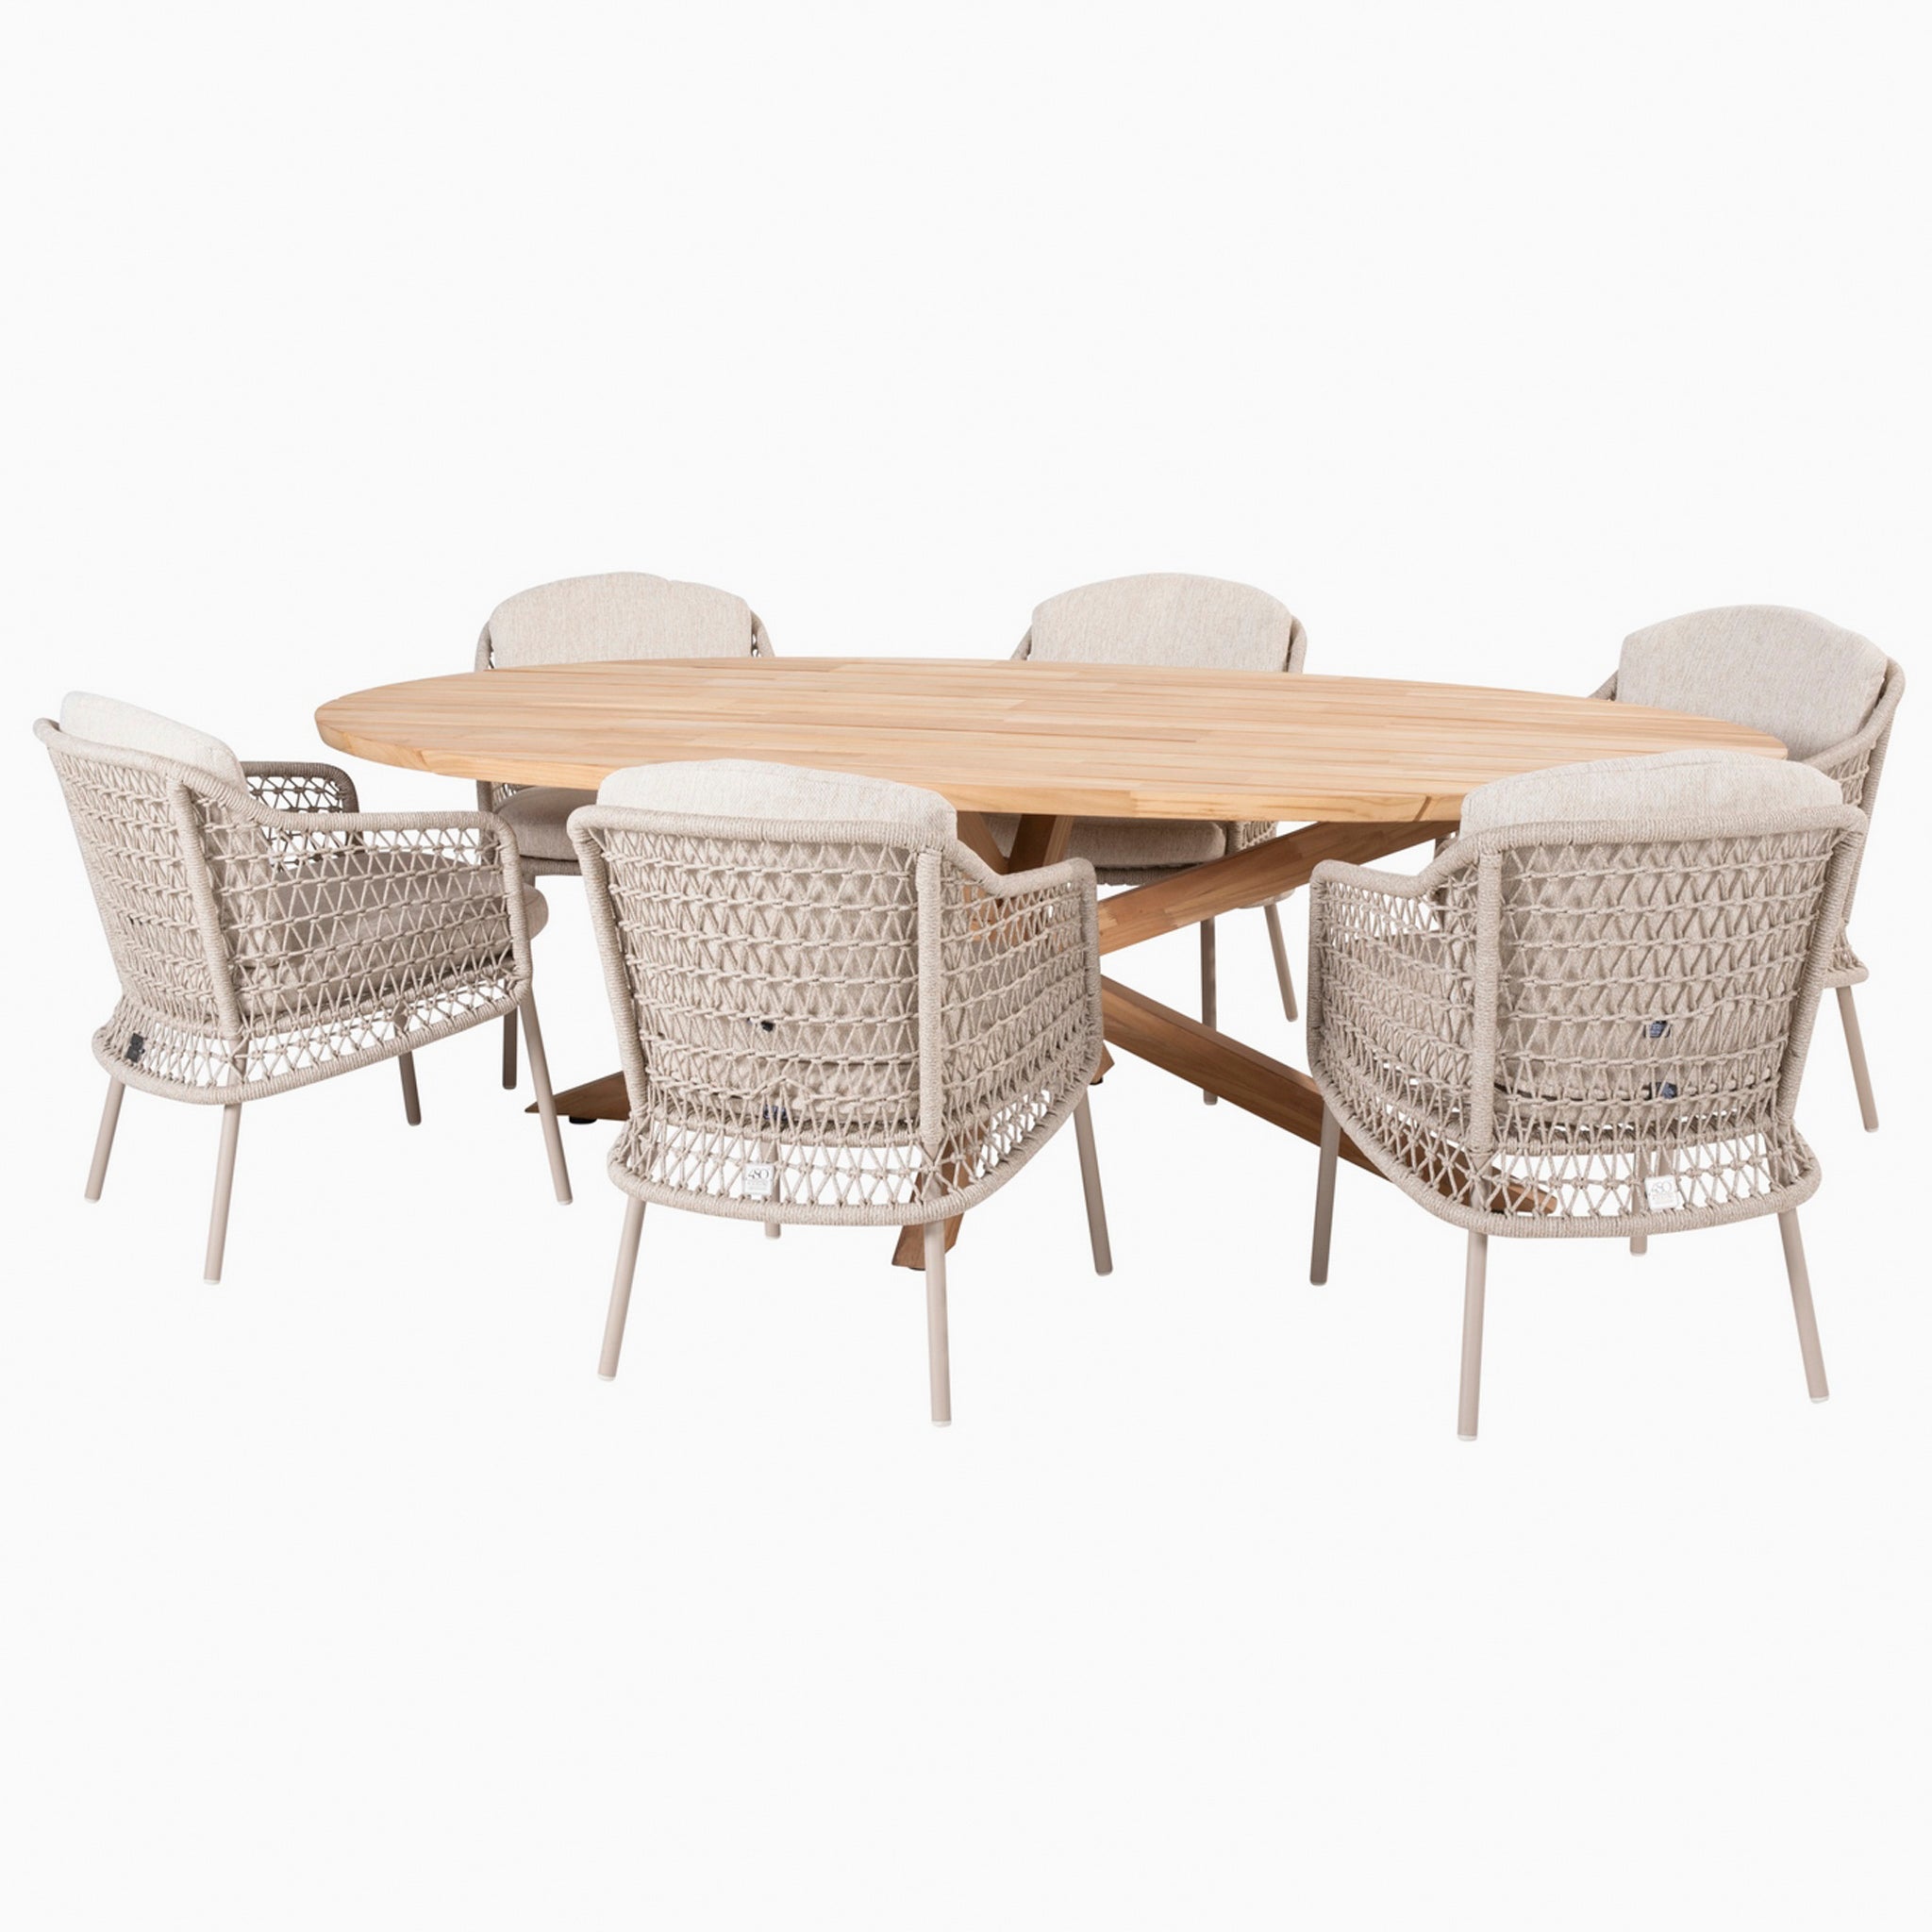 Puccini 6 Seat Oval Dining Set in Latte